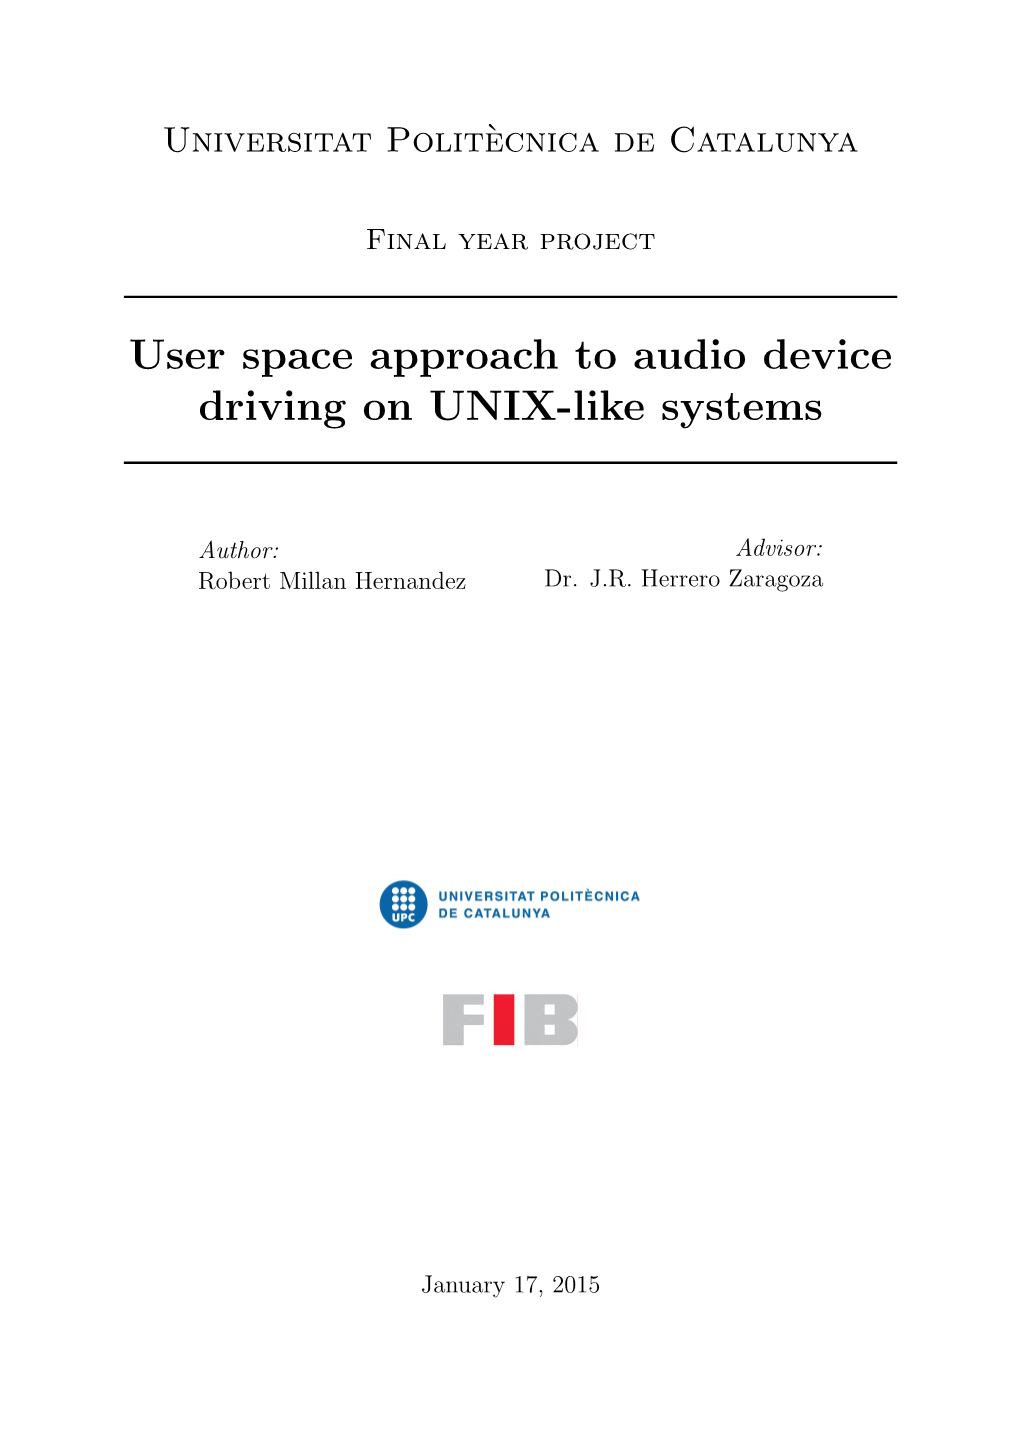 User Space Approach to Audio Device Driving on UNIX-Like Systems